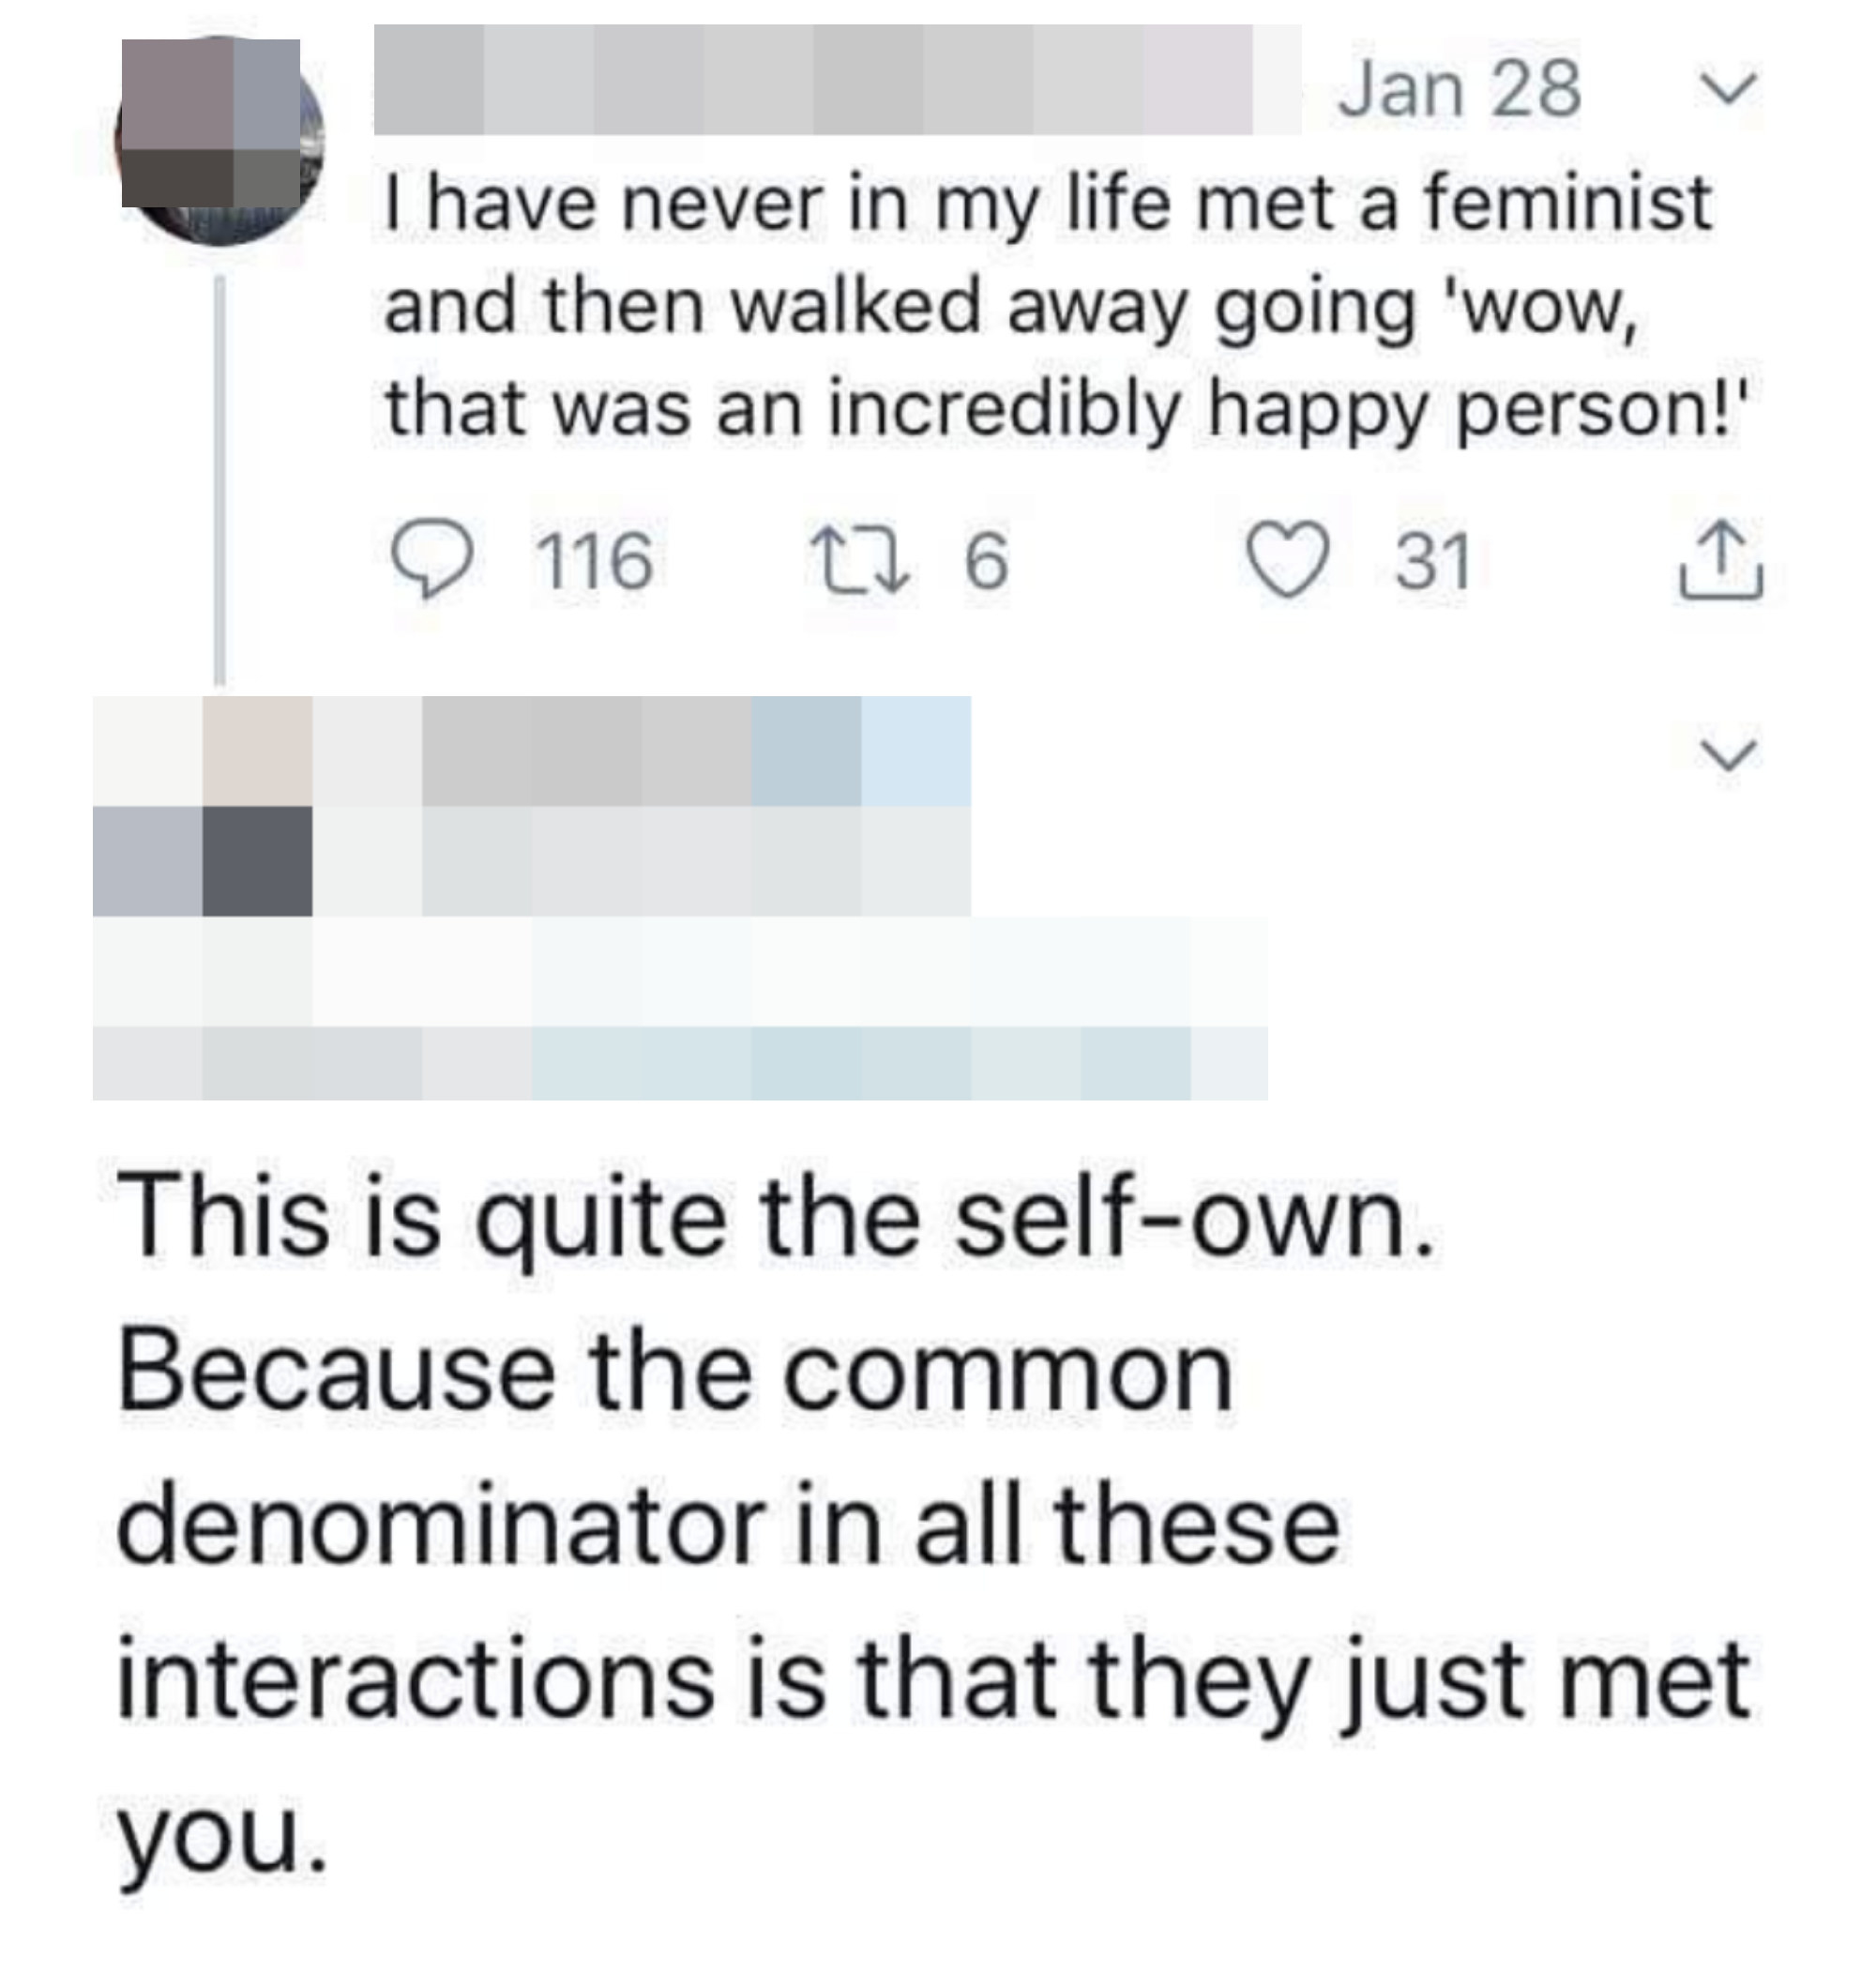 man saying he&#x27;s never left meeting a feminst thinking thats a happy person and someone calling him out to say this is quite the self own since the common denominator is that they just met him